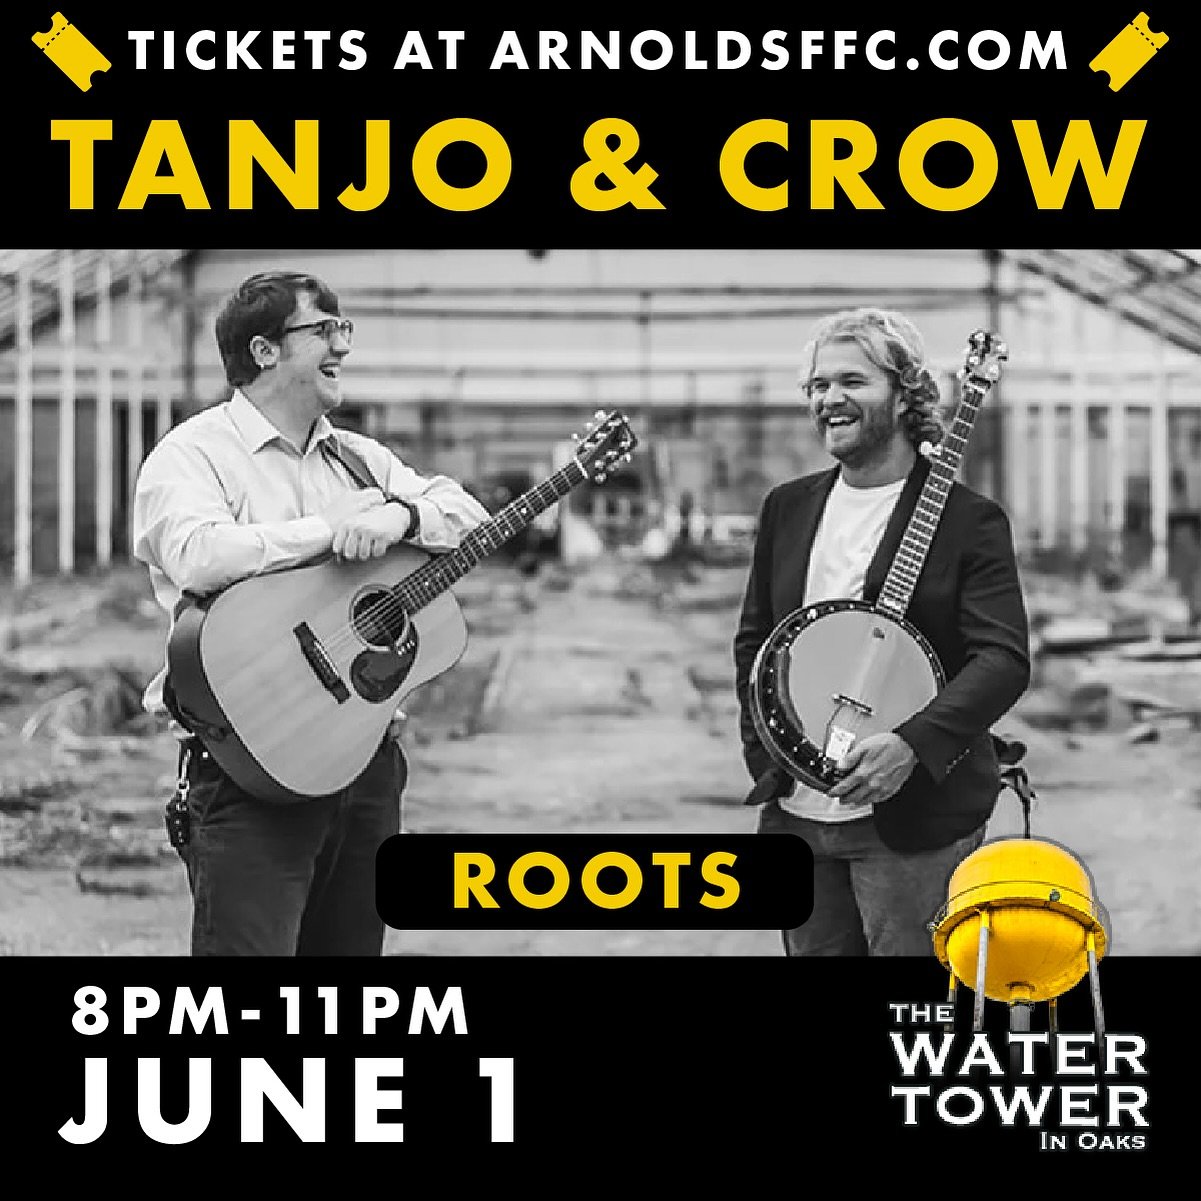 @tanjoandcrow are bringing Roots music to the Water Tower! 🎟️Get tickets at ArnoldsFFC.com 

The Tanjo &amp; Crow is a no-holds-barred exploration of roots music through eclectic songwriting, Appalachian arrangements, and seemingly fearless improvis